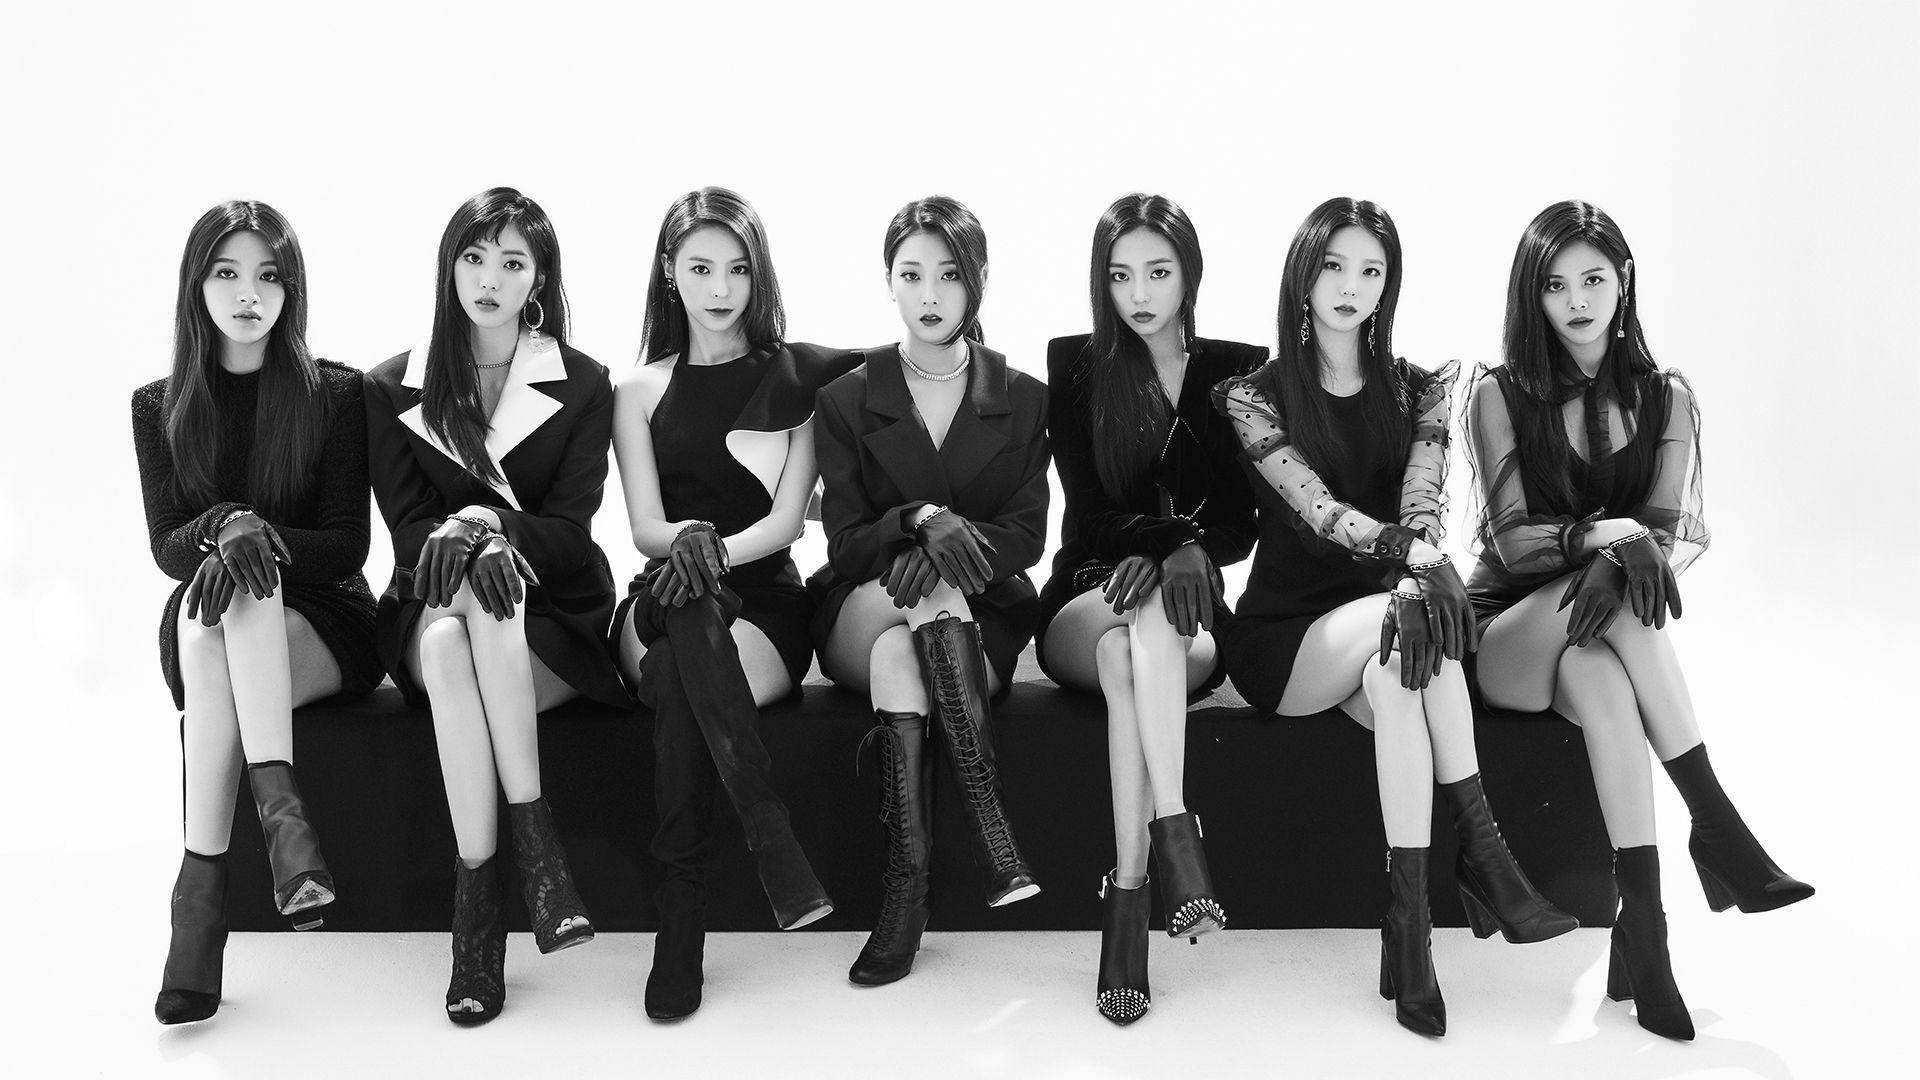 Group Clc Black And White Wallpaper